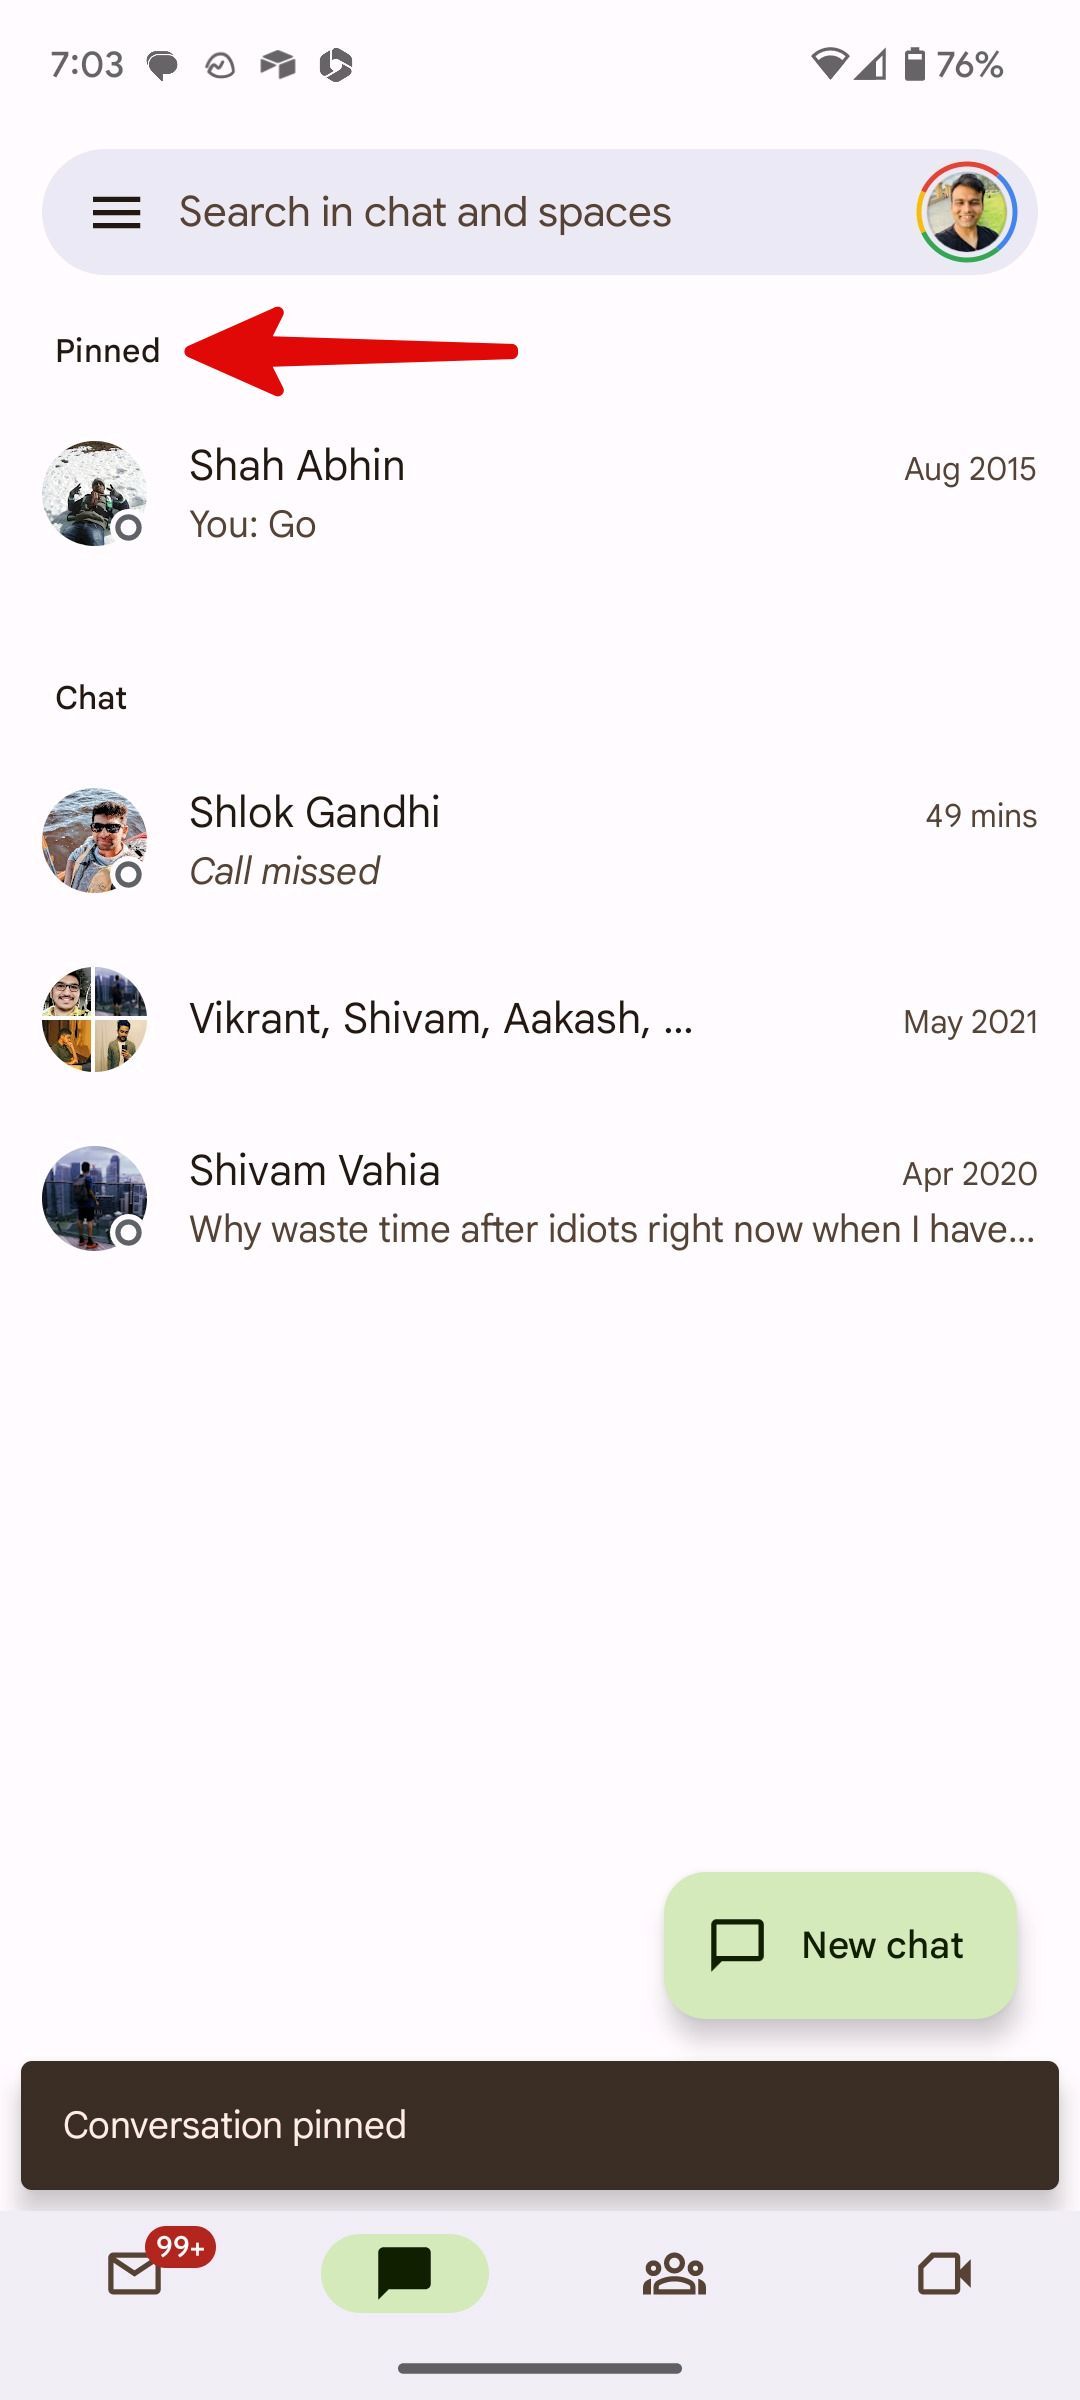 pinned conversations in Google Chat